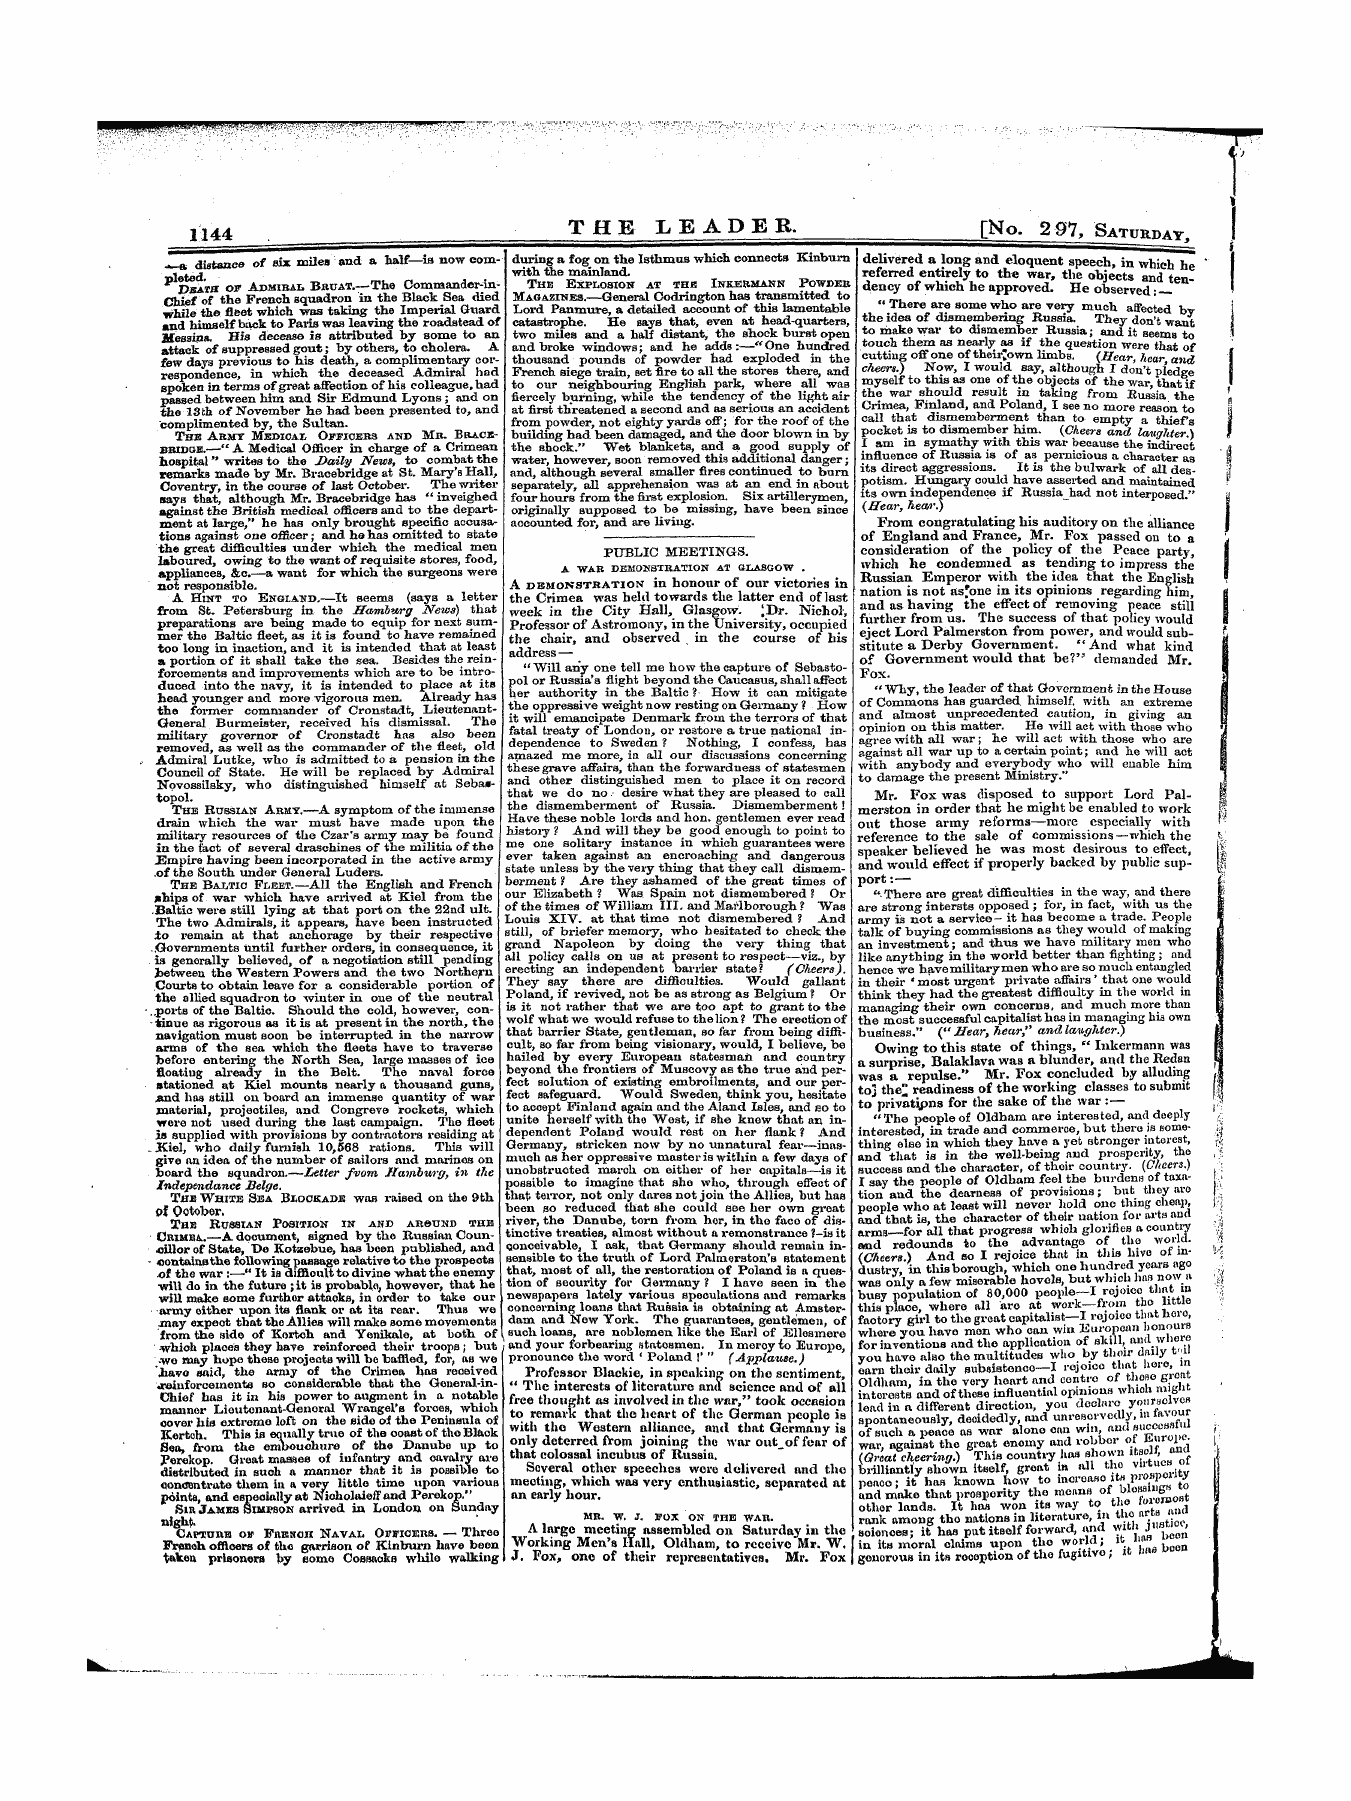 Leader (1850-1860): jS F Y, 1st edition: 4